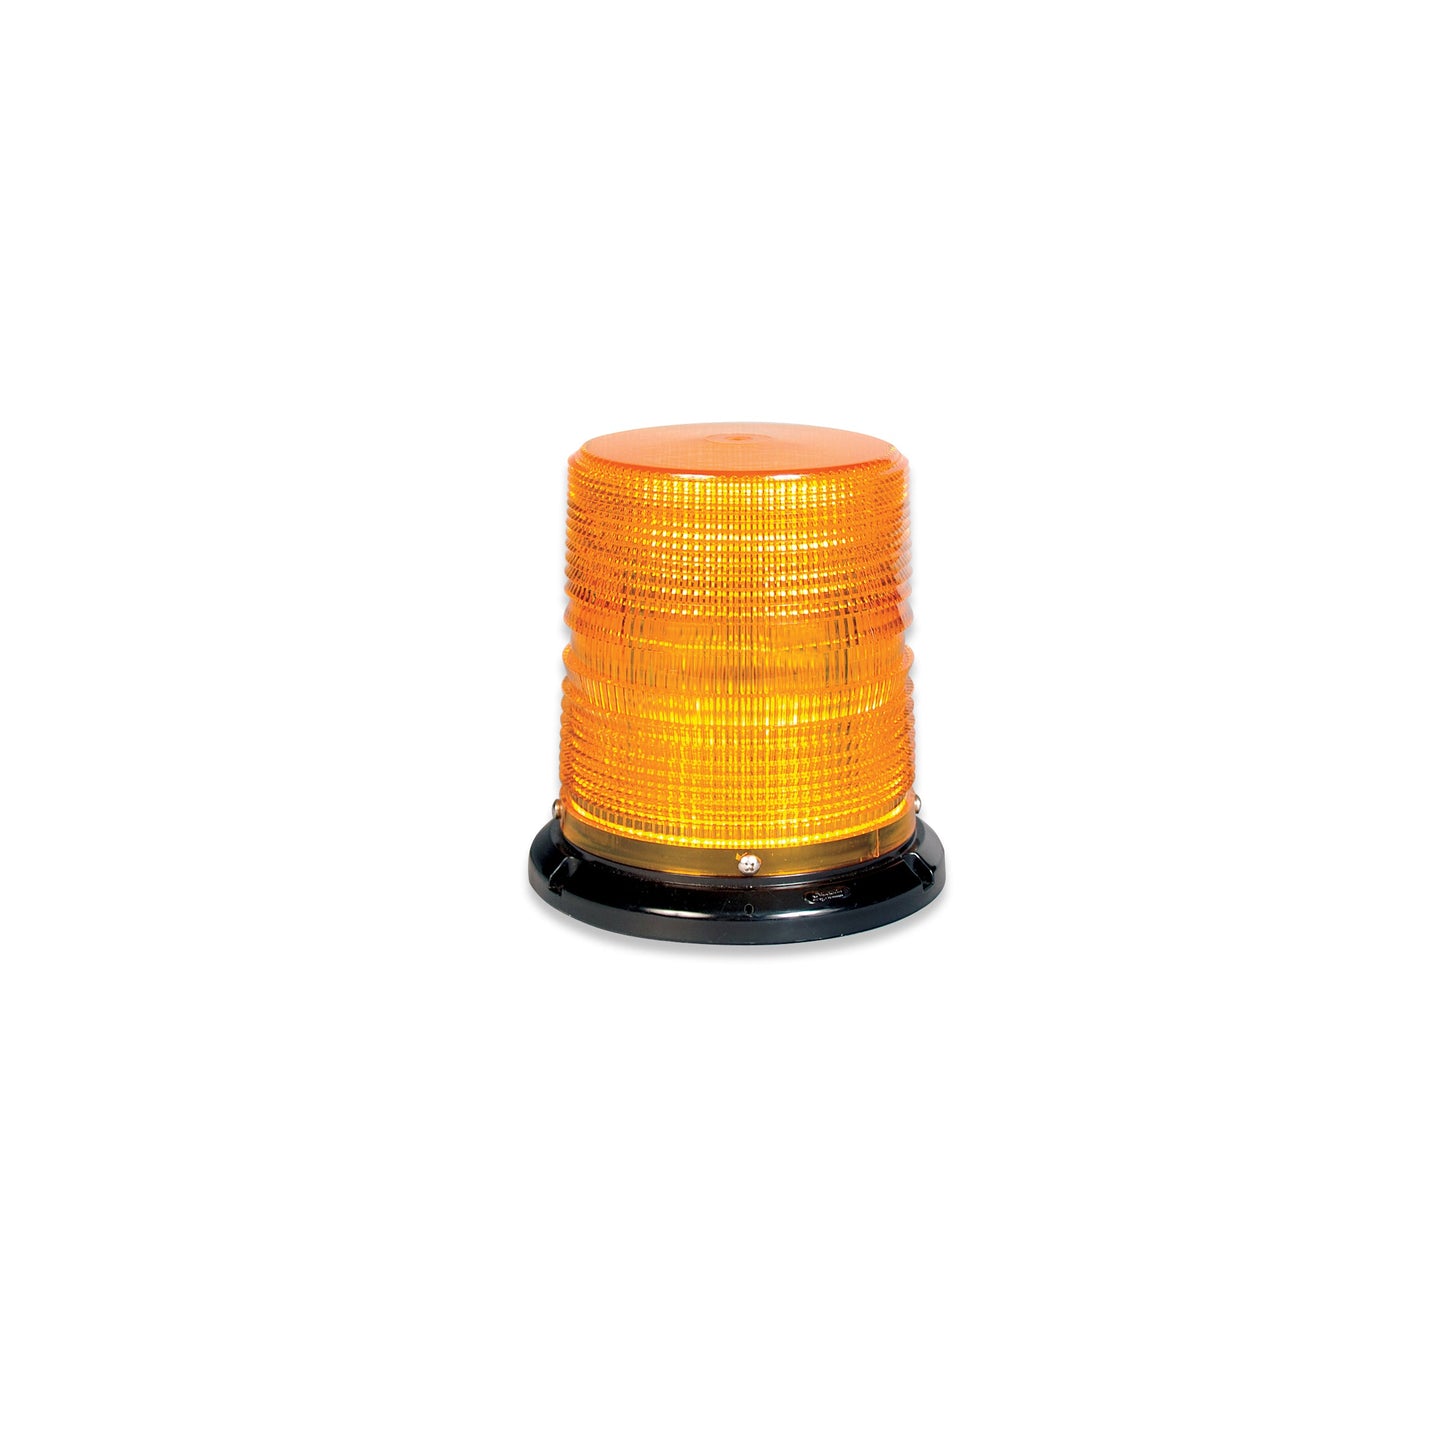 Soundoff Signal ELB45BMH+WC 4500 Series Led Beacon, 10-30V, Sae J845 Class 1 - Magnetic Mount, 6" White Dome/ Clear Leds